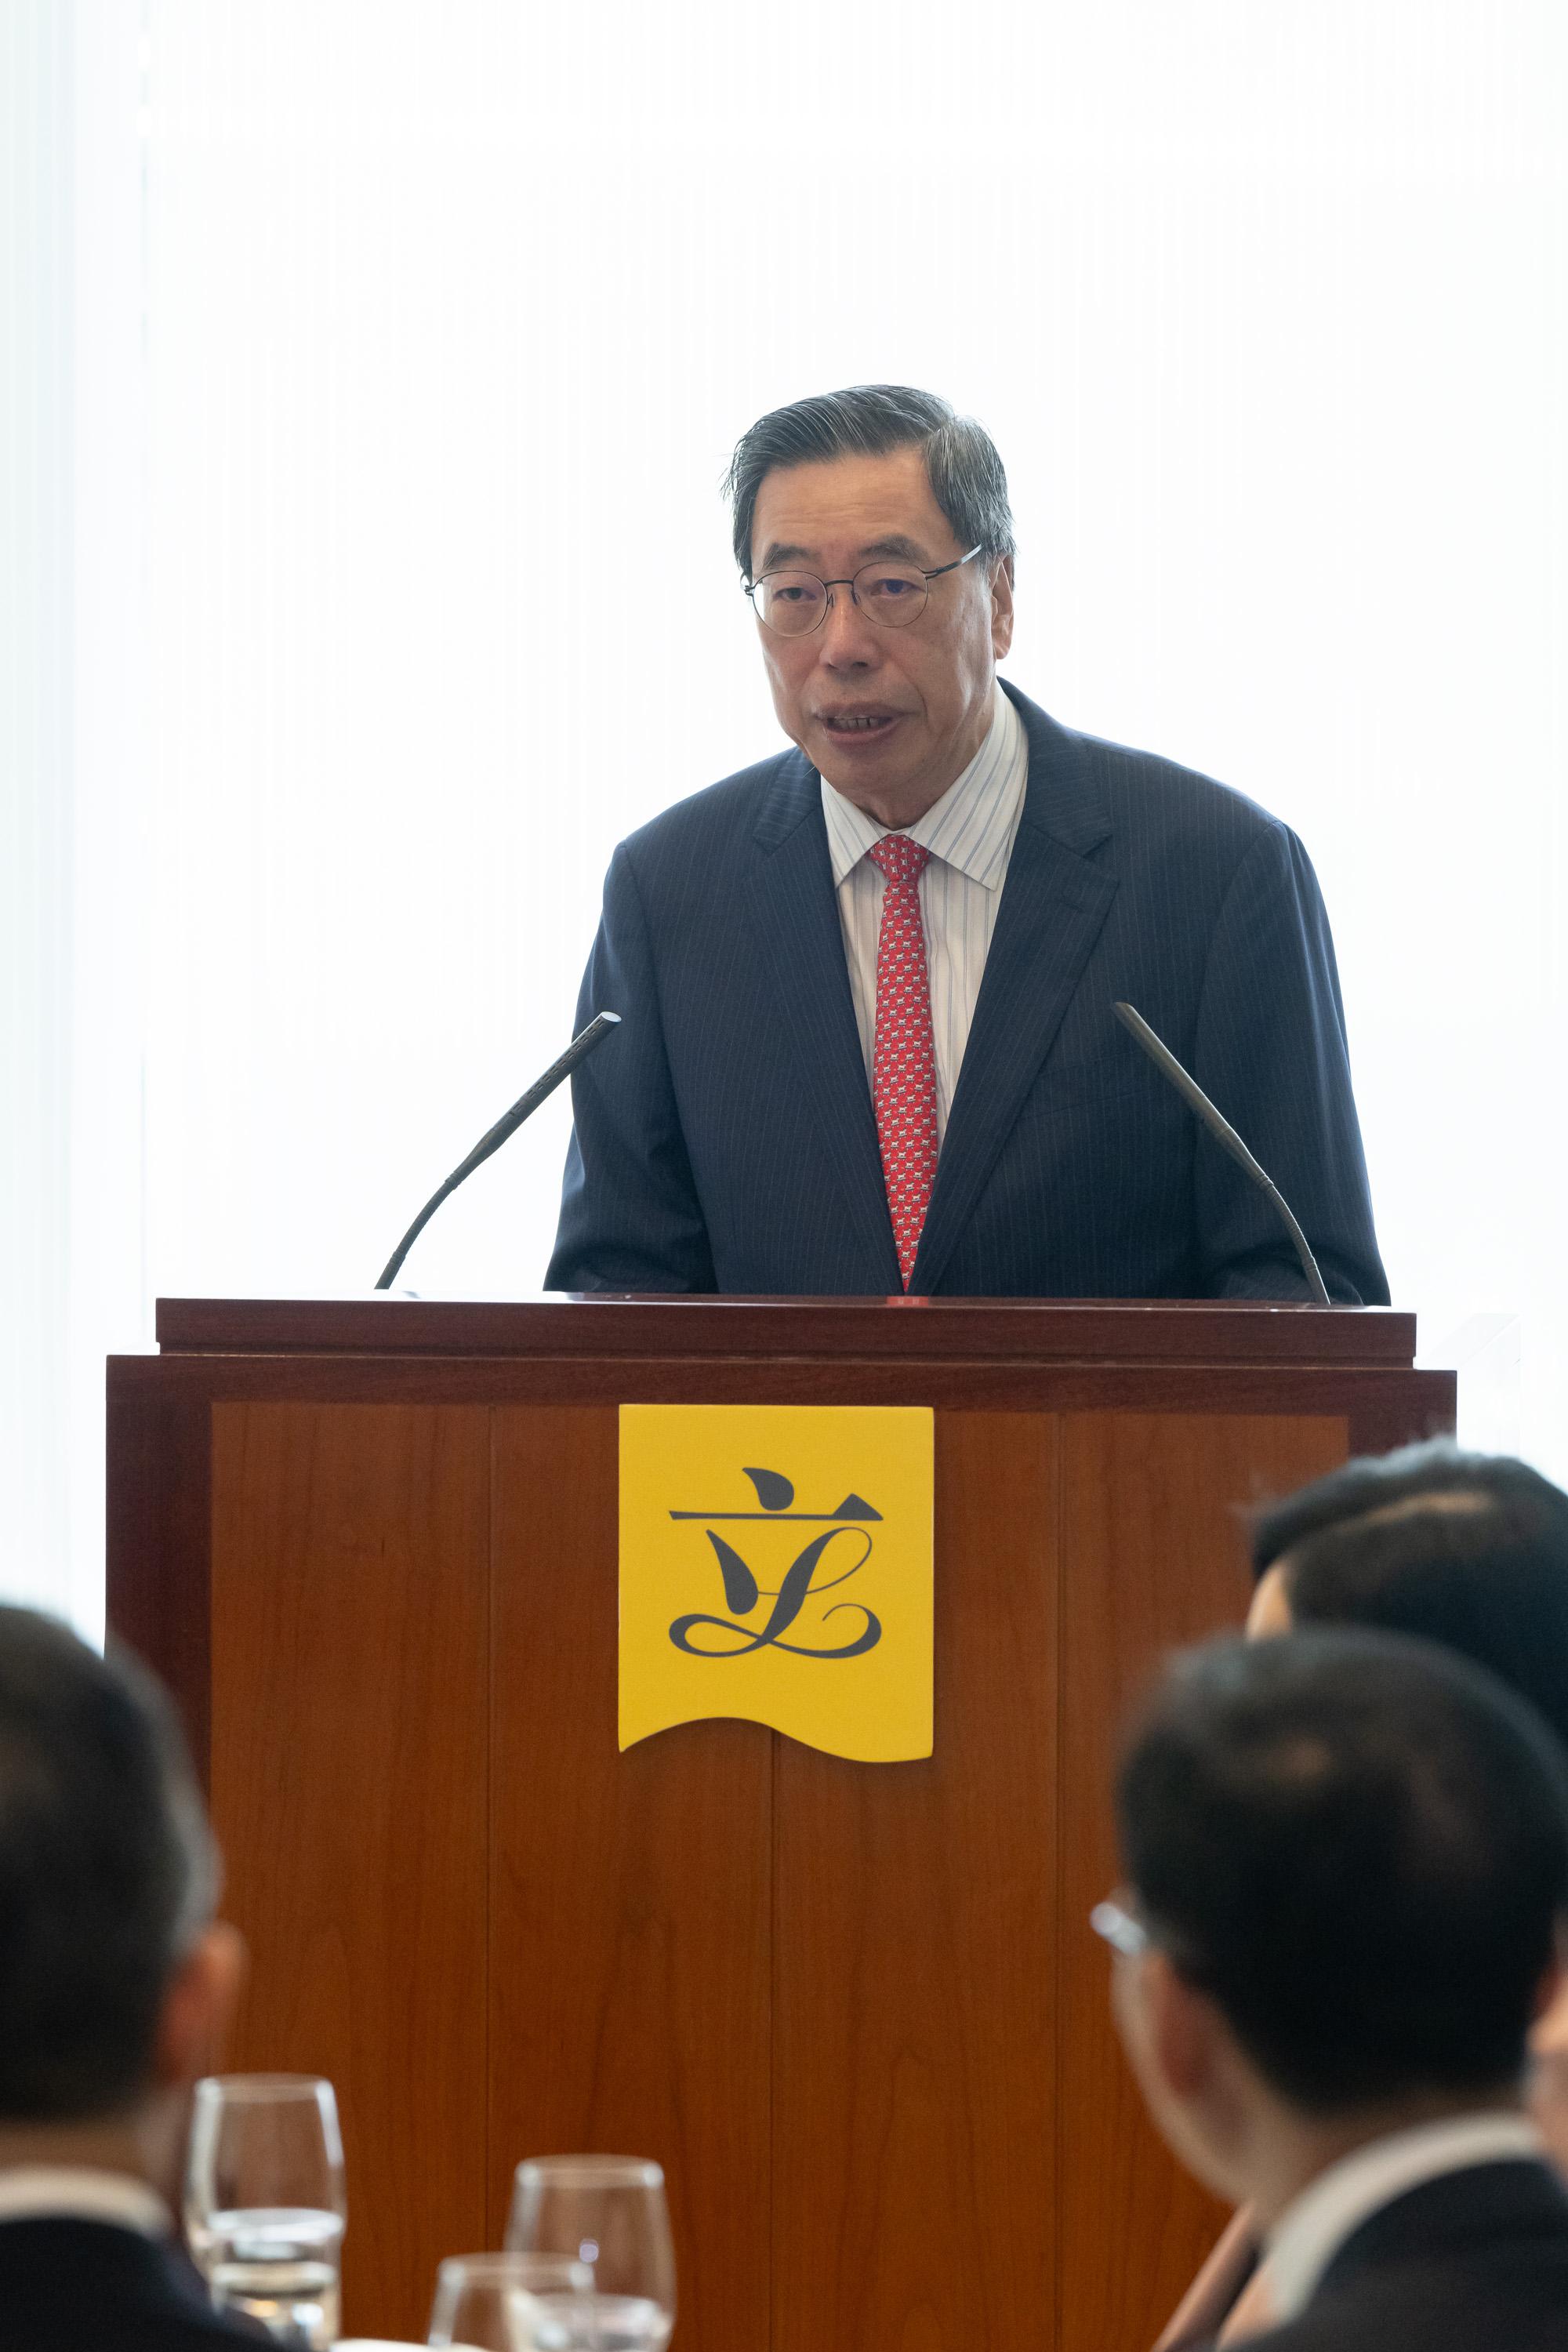 The President of the Legislative Council (LegCo), Mr Andrew Leungn, hosted a luncheon for LegCo Members and the Director and other officials of the Liaison Office of the Central People's Government in the Hong Kong Special Administrative Region. Photo shows the President of LegCo, Mr Andrew Leung, delivering a speech at the luncheon.